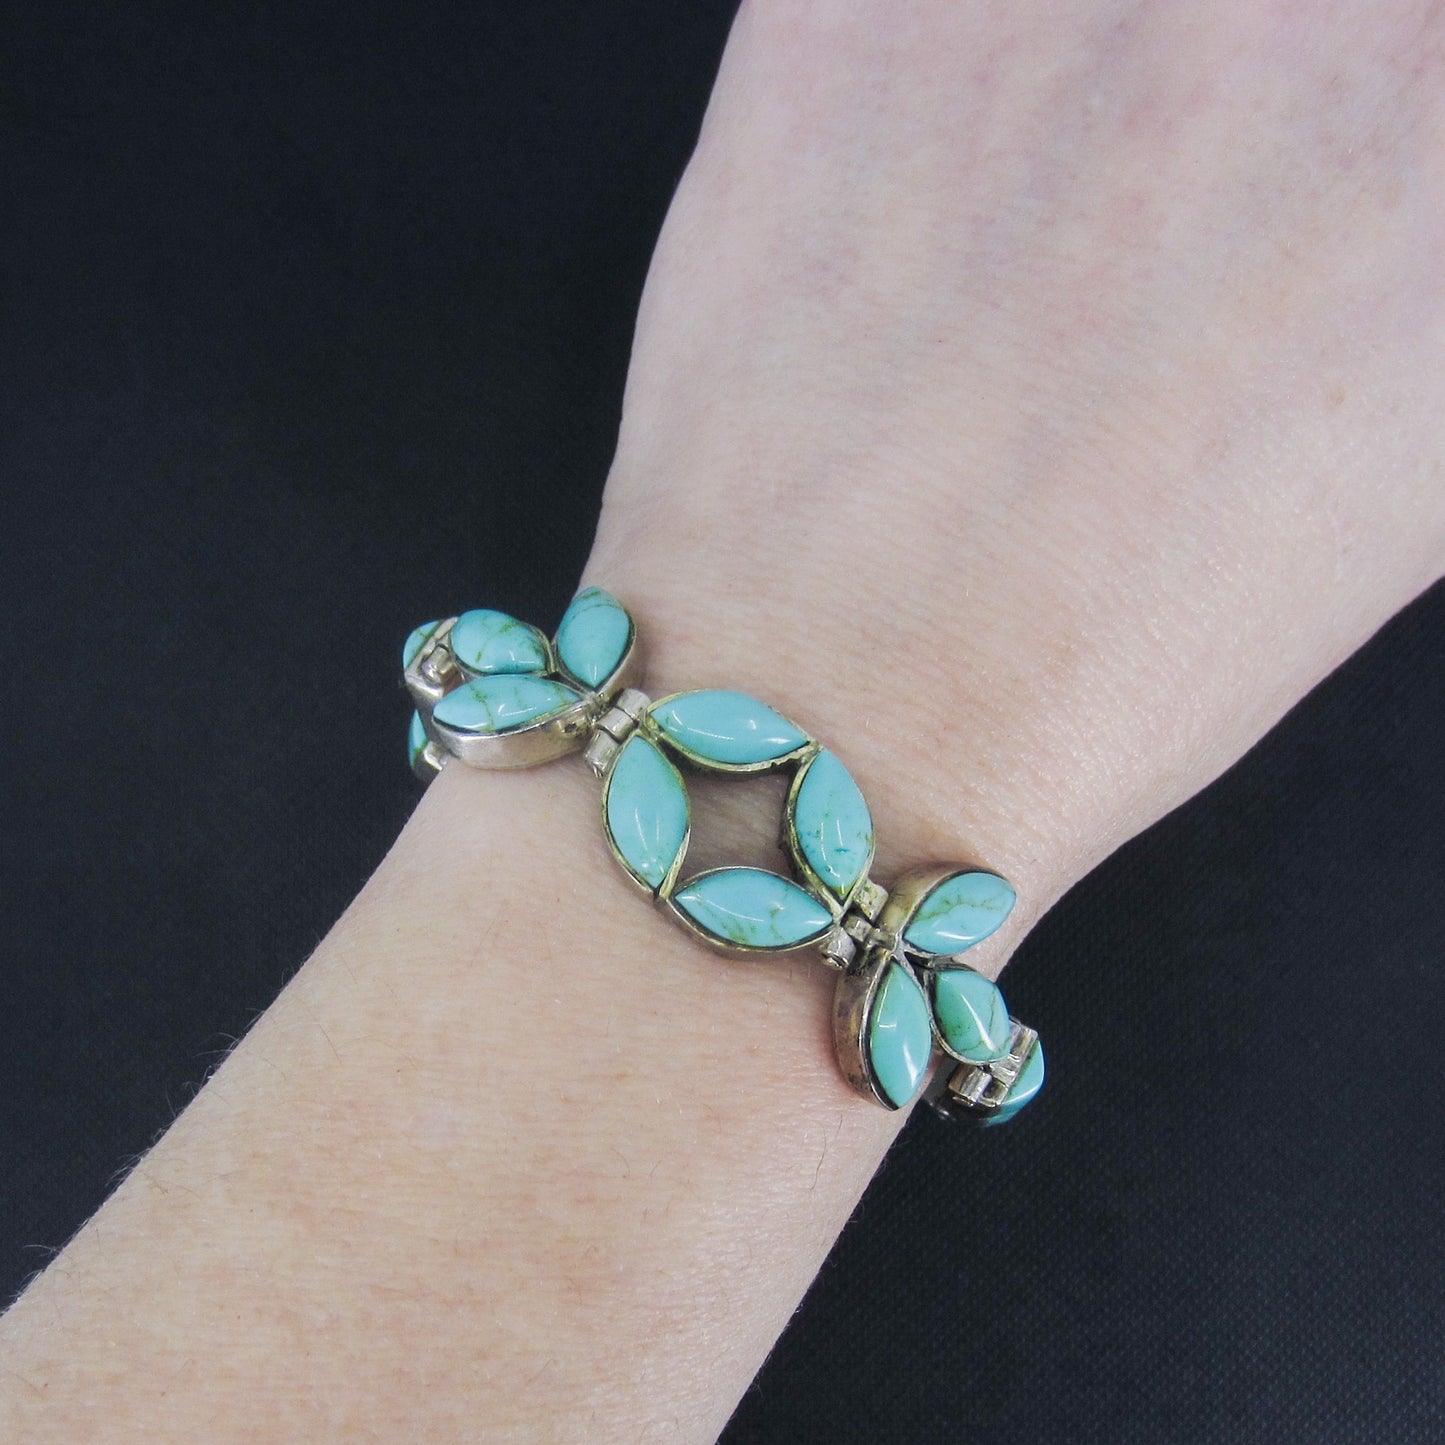 SOLD--Vintage Taxco Turquoise Bracelet Sterling, Mexico c. 1970